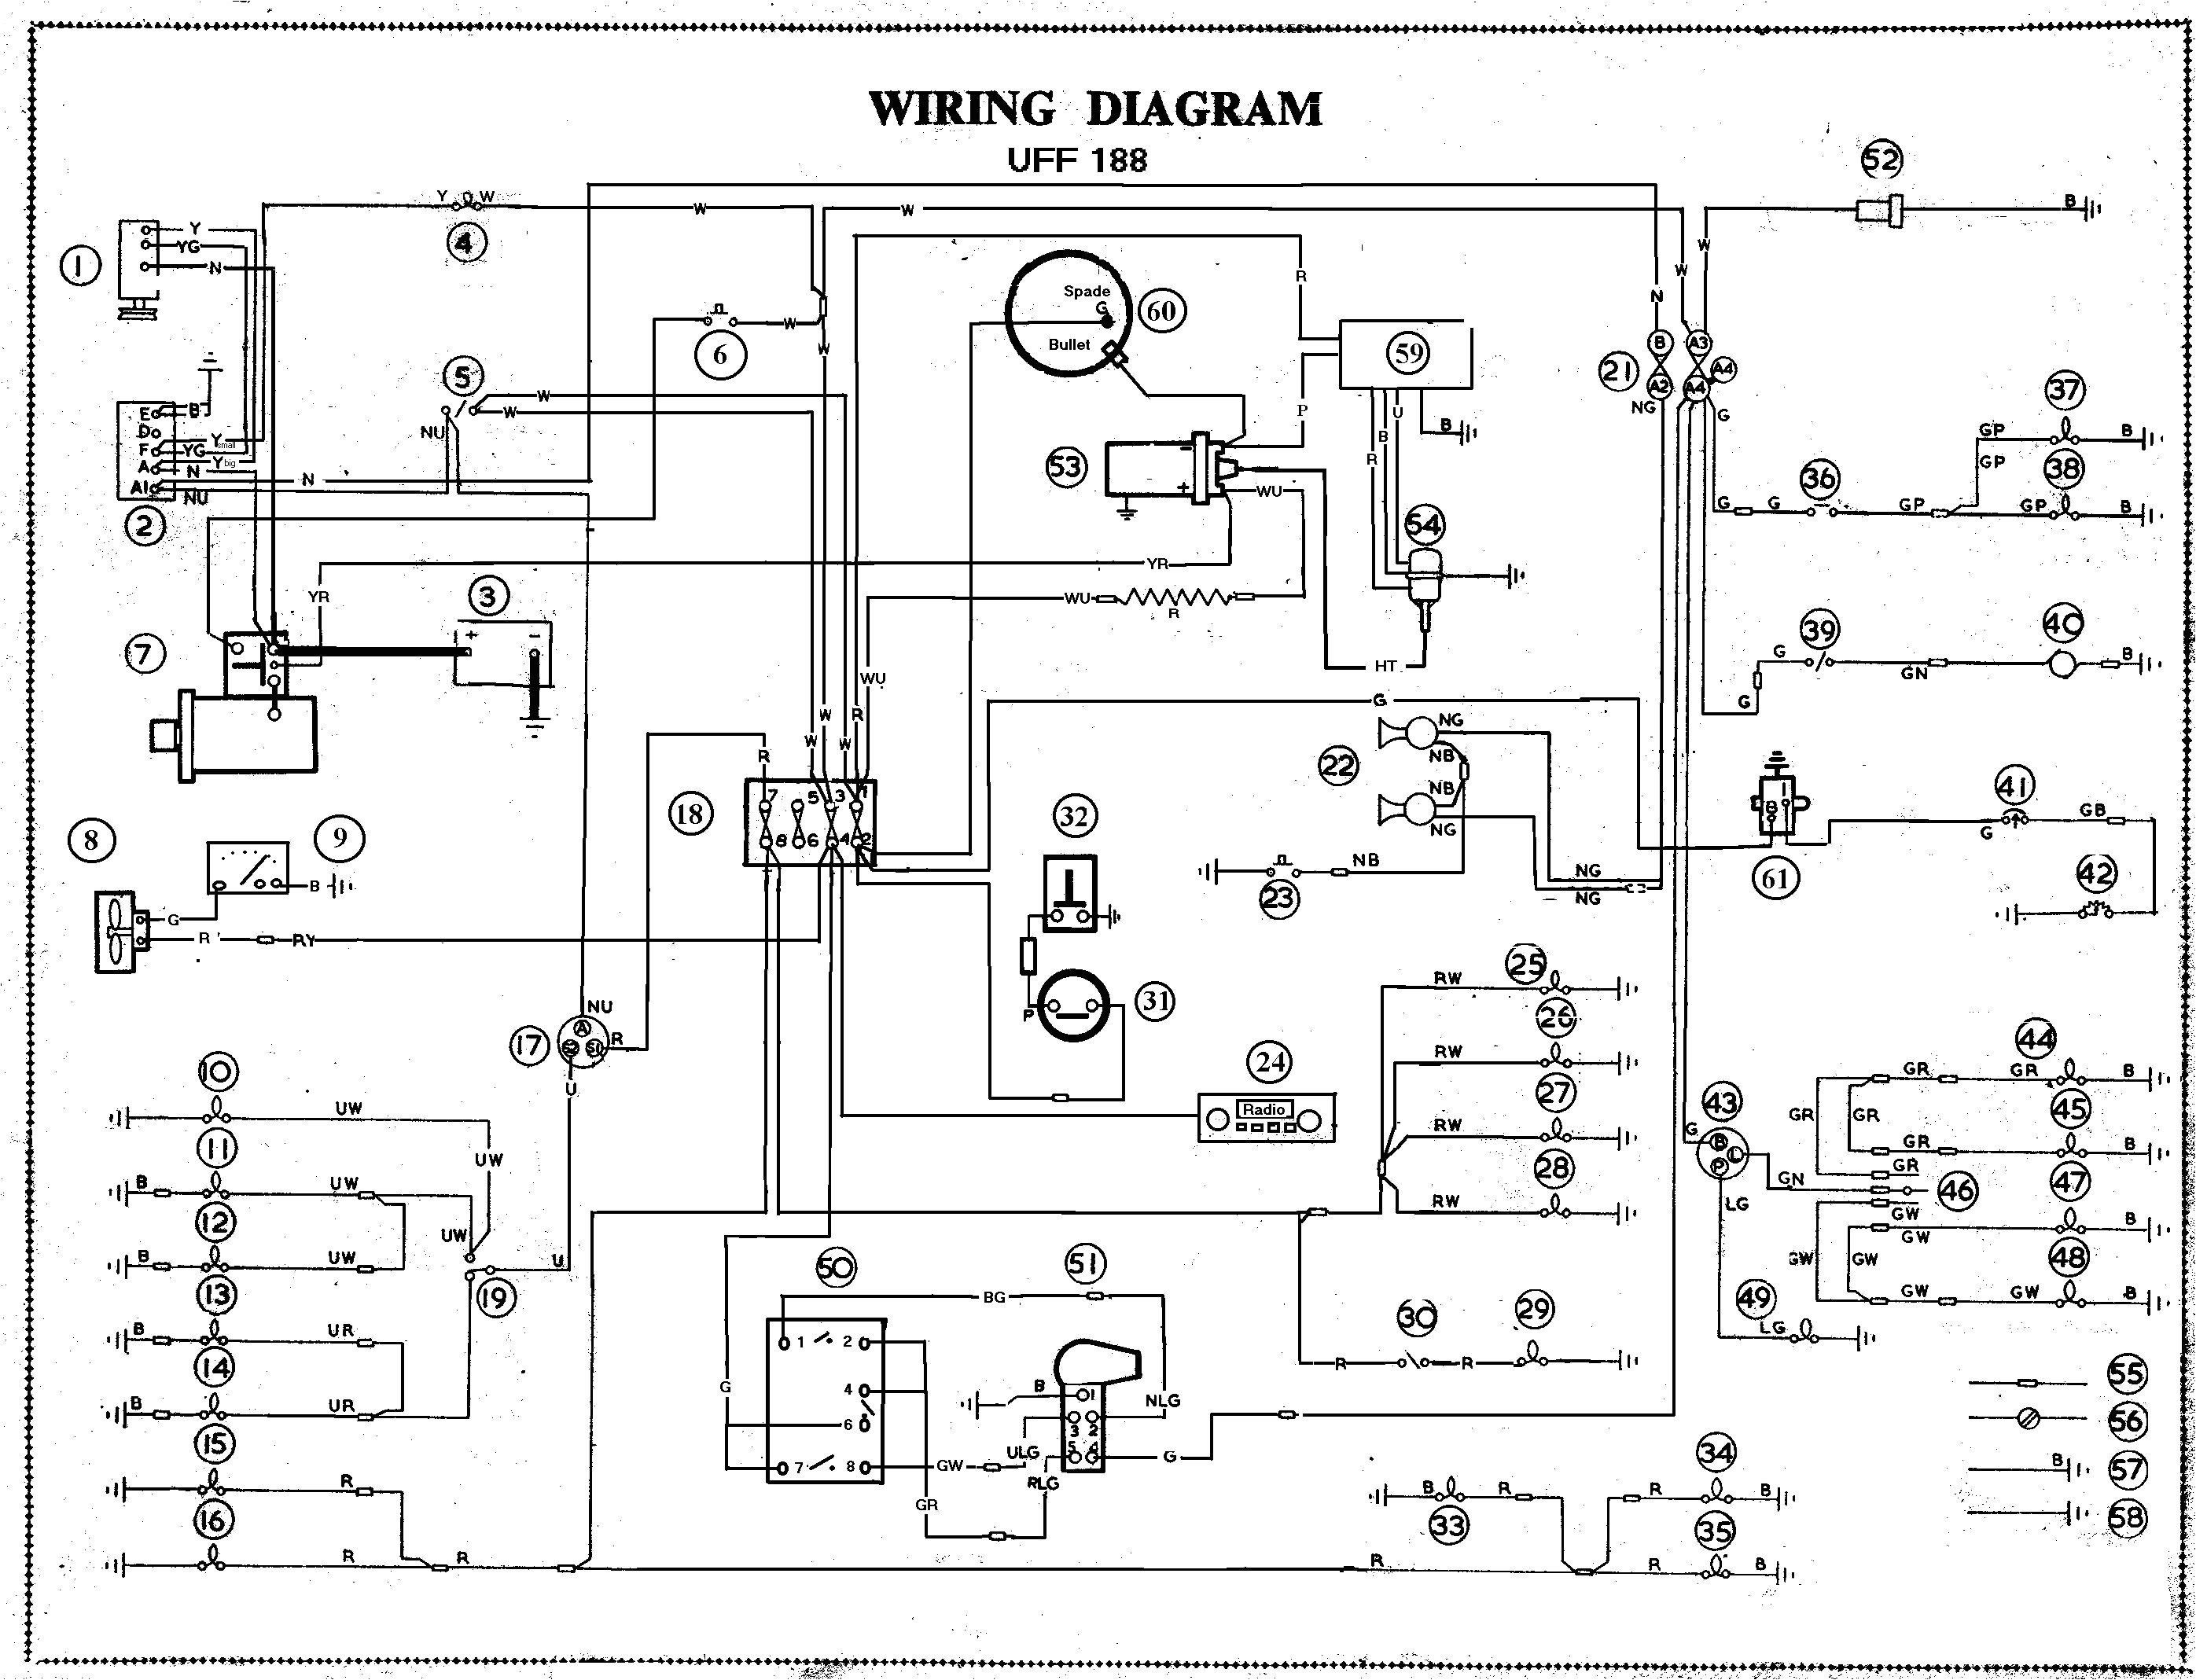 schematic diagram on simple electronic circuit schematic diagram electric circuit diagram furthermore electronic circuit diagrams